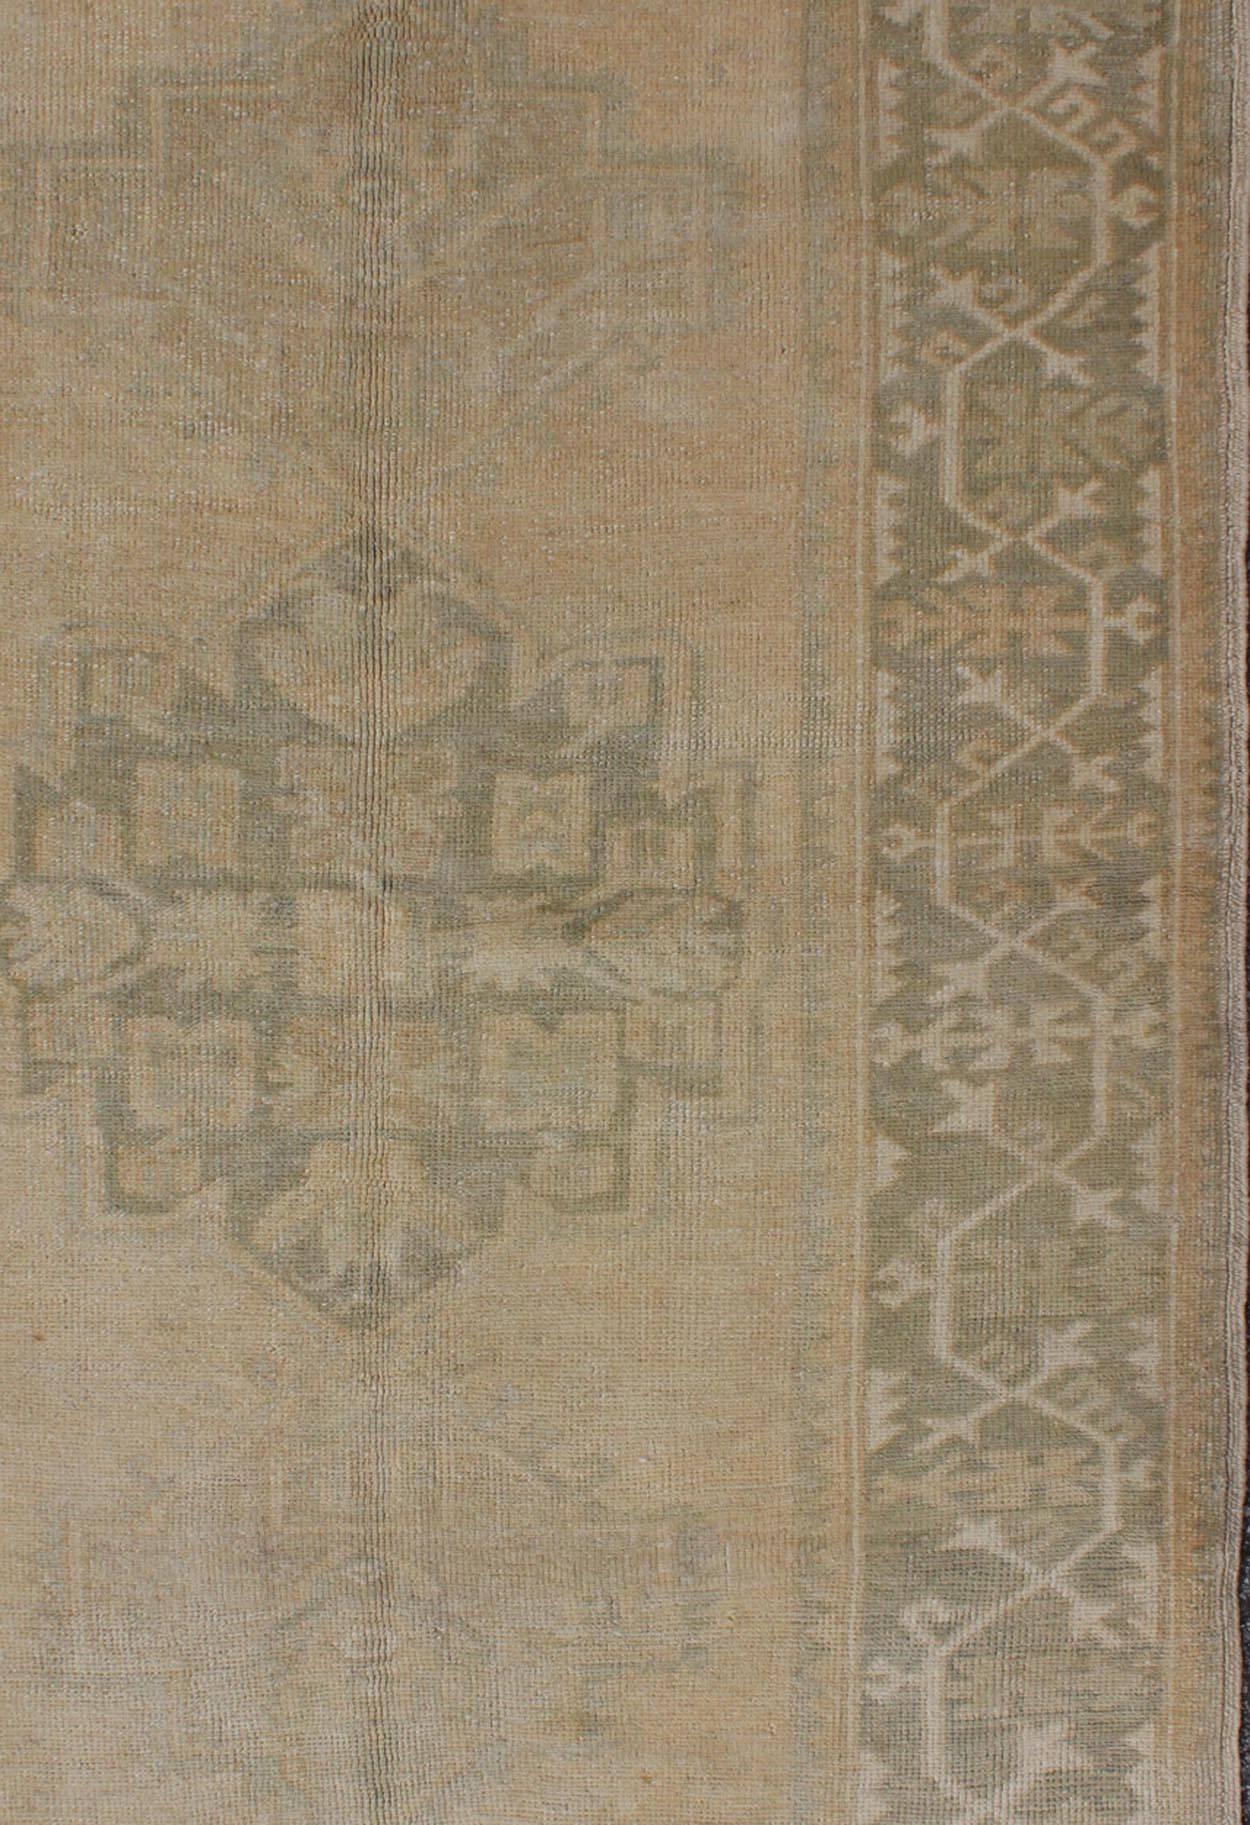 Medallion Vintage Turkish Oushak Rug in Taupe, Green and Sand Colors In Good Condition For Sale In Atlanta, GA